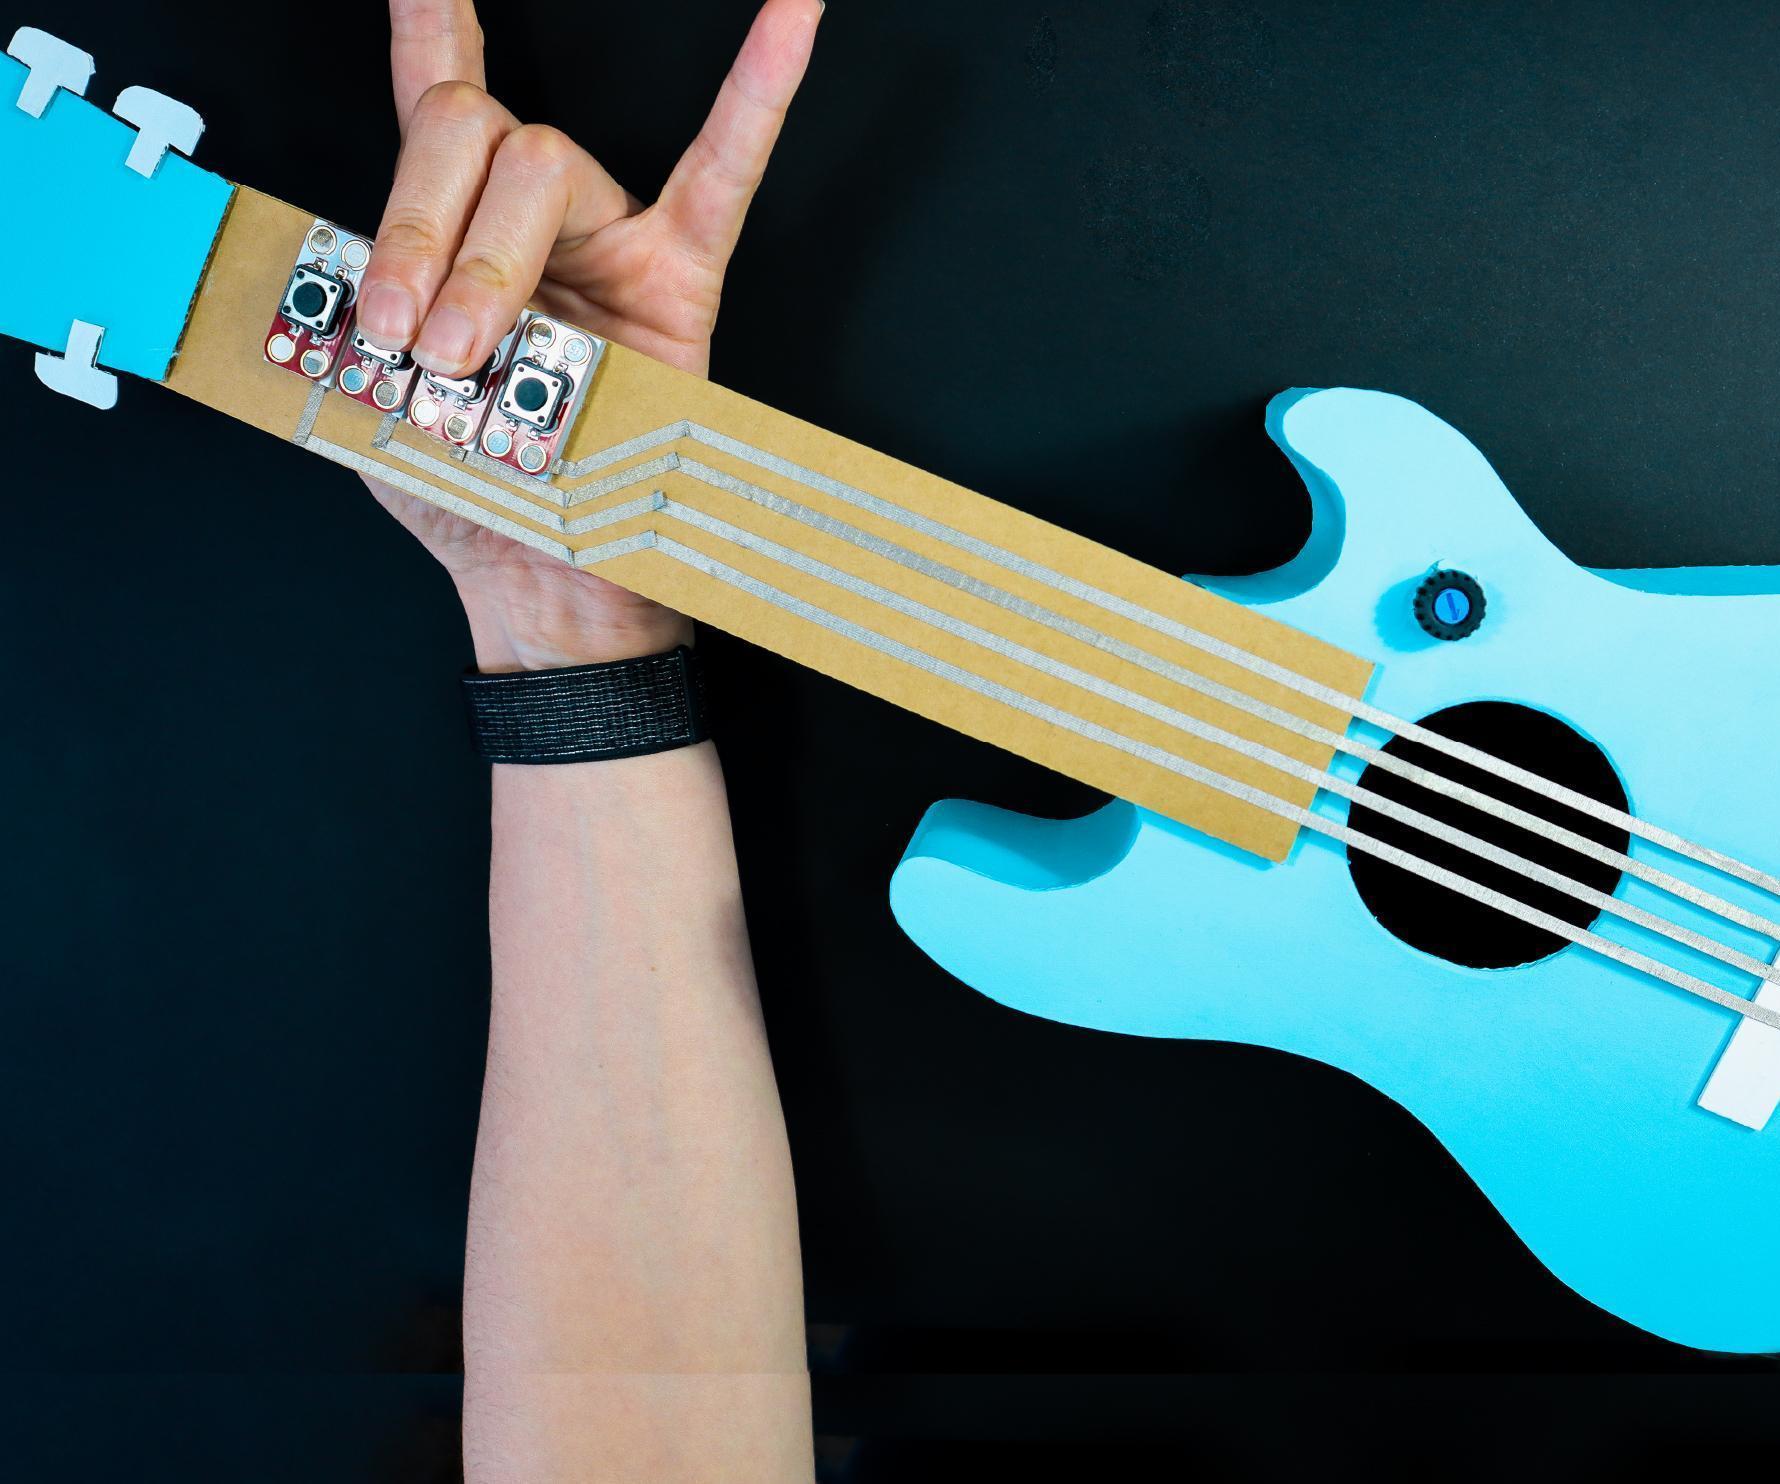 The "Instant Star Guitar": a Cardboard 4-Chord Electric Guitar